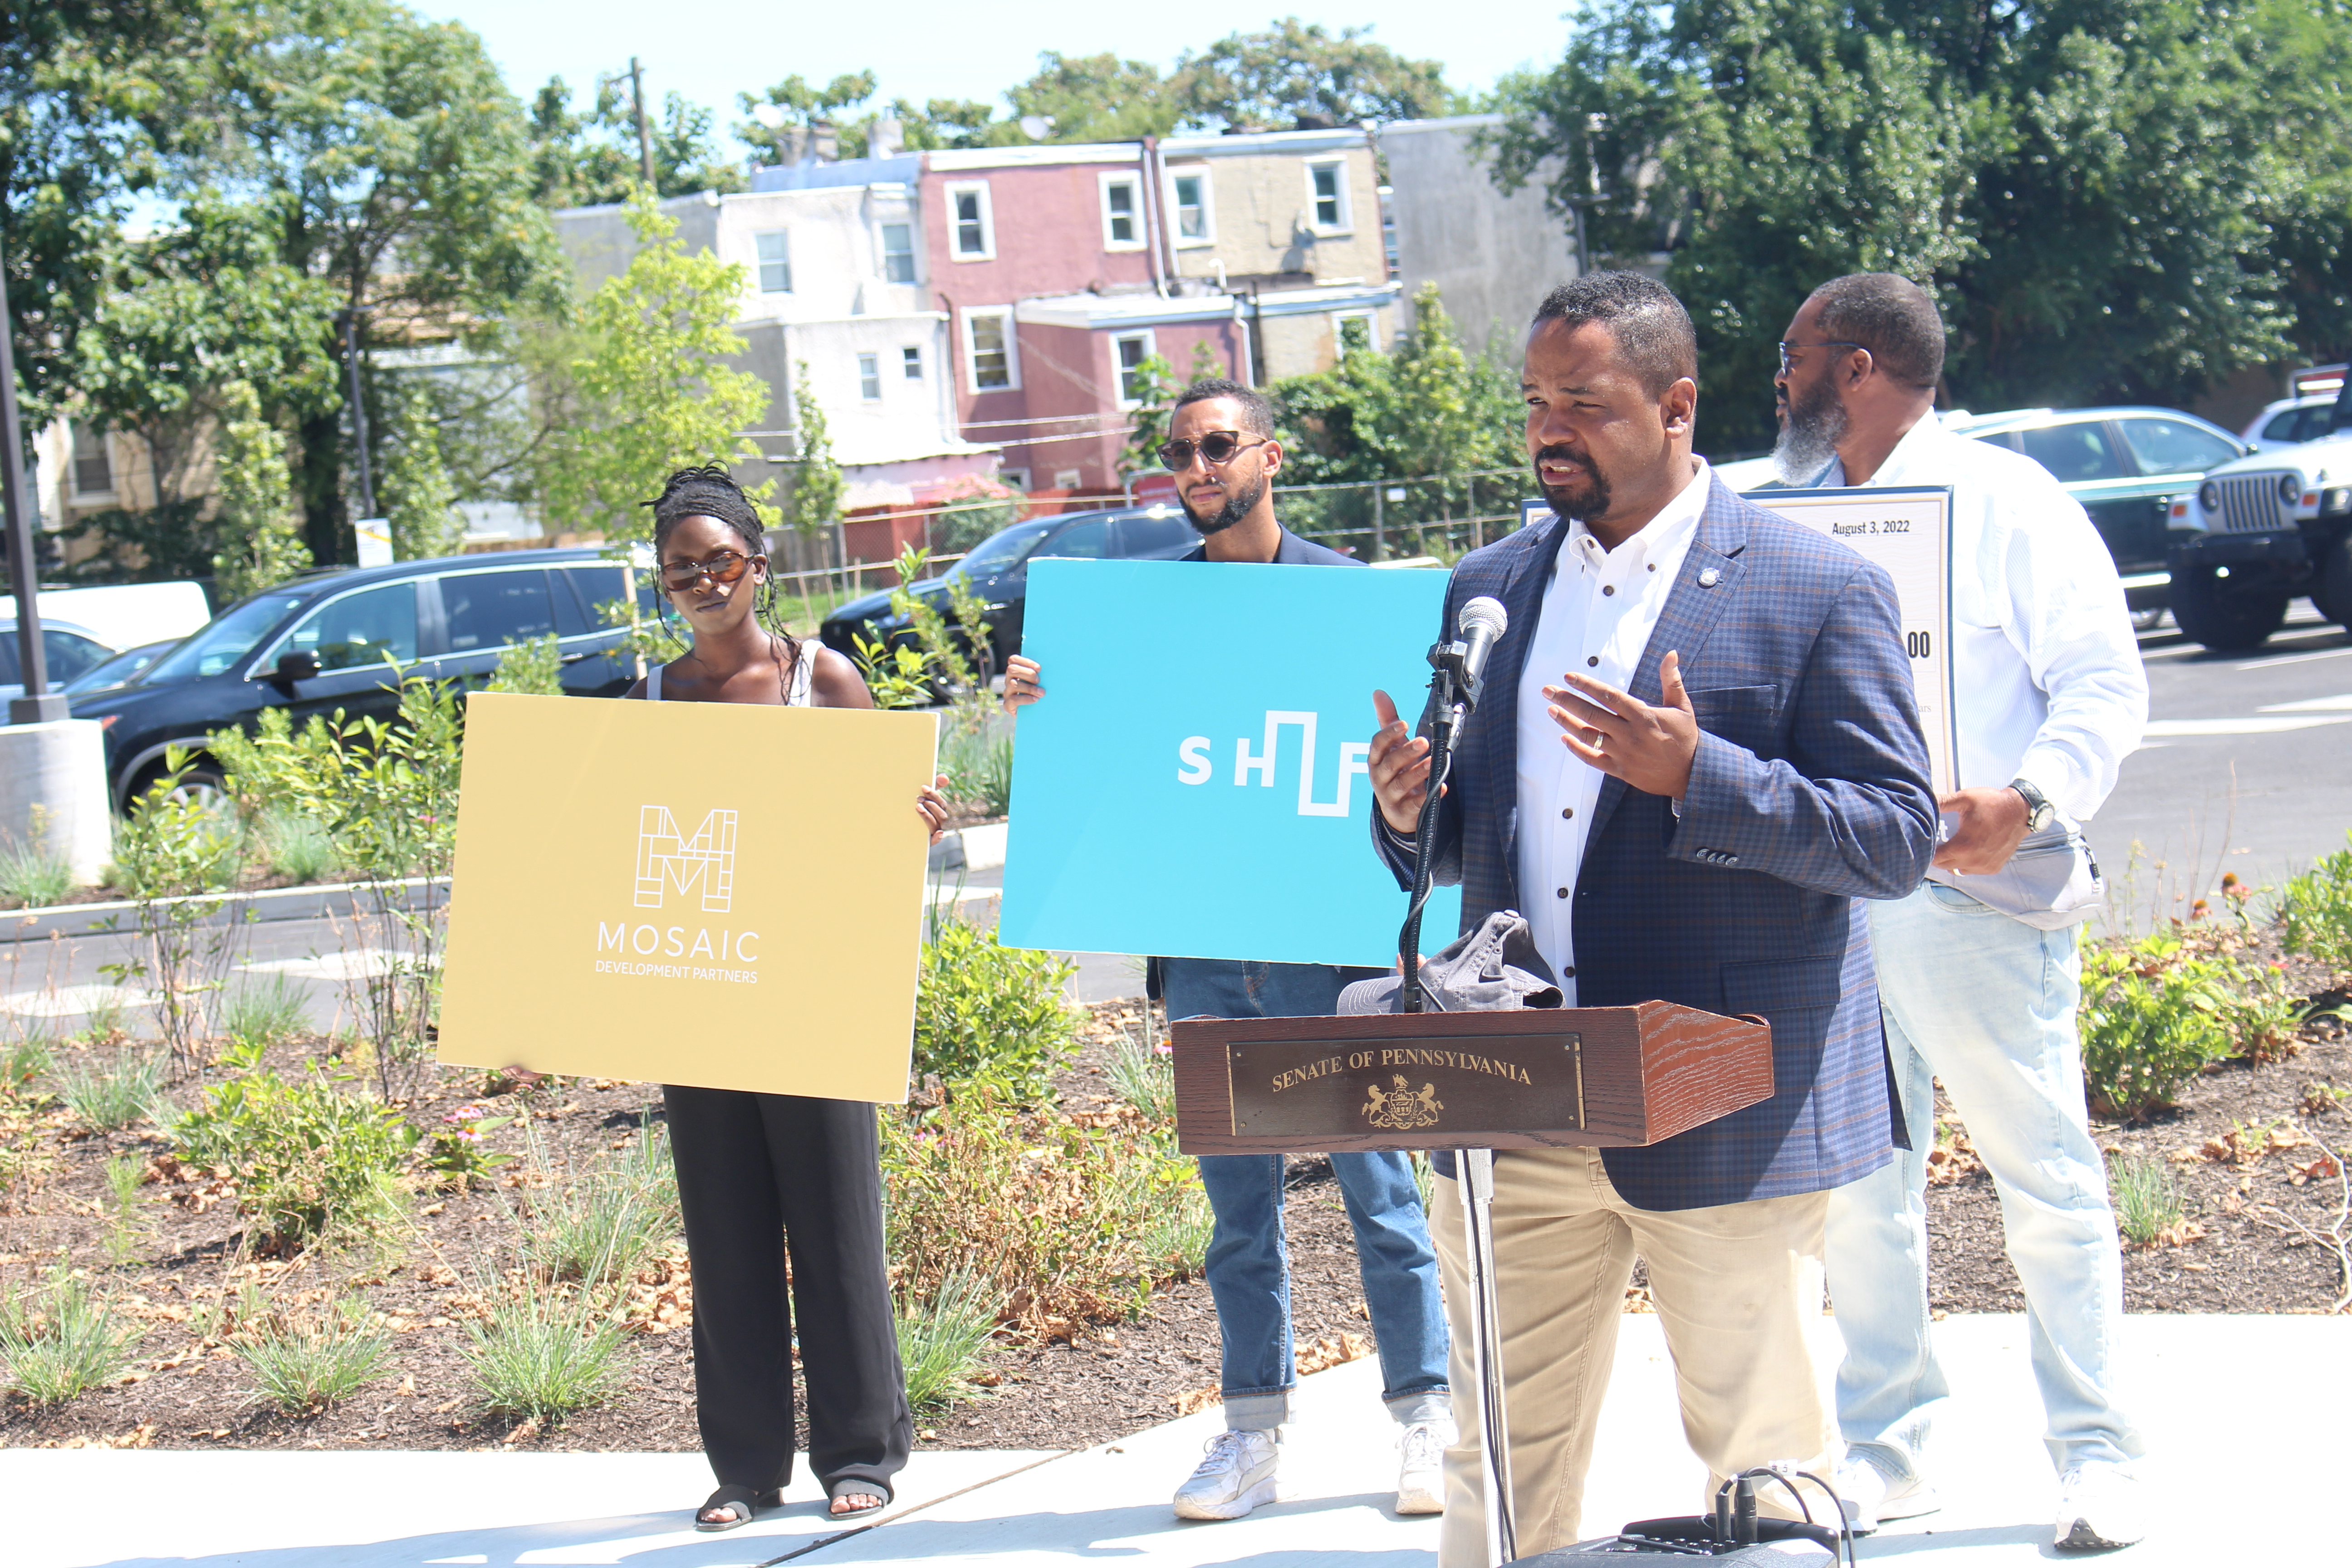 Sen. Sharif Street has been advocating for state funding for the Sharswood neighborhood, one of the many he represents. Photo: Jensen Toussaint/AL DÍA News.